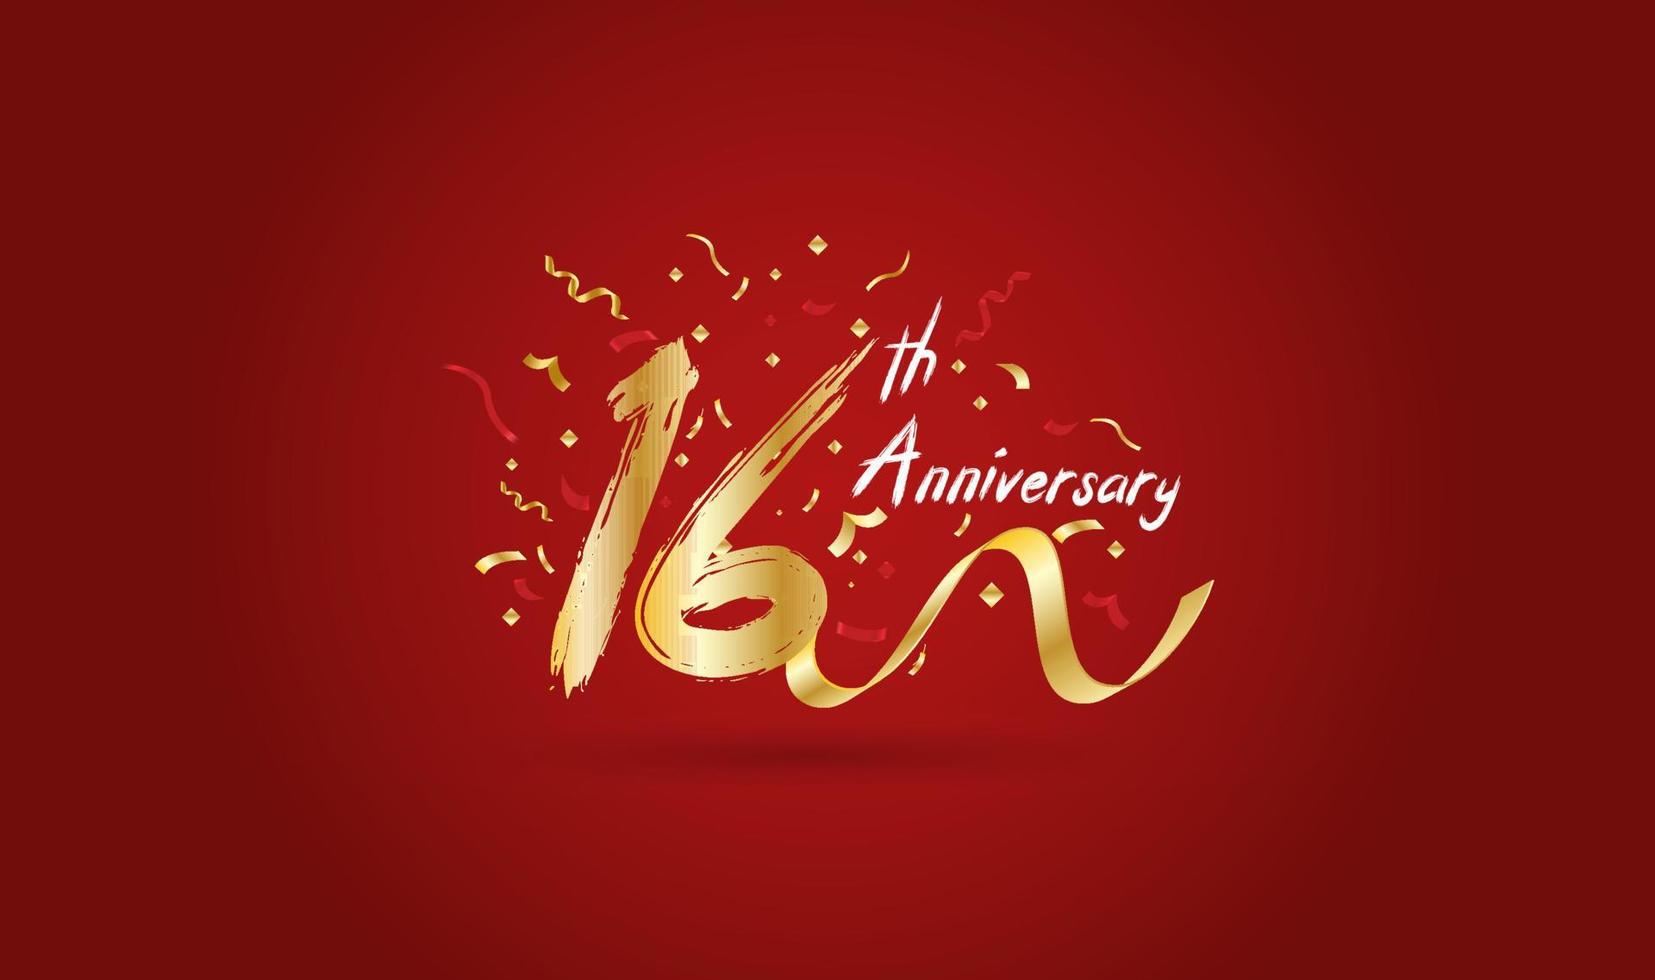 Anniversary celebration background. with the 16th number in gold and with the words golden anniversary celebration. vector